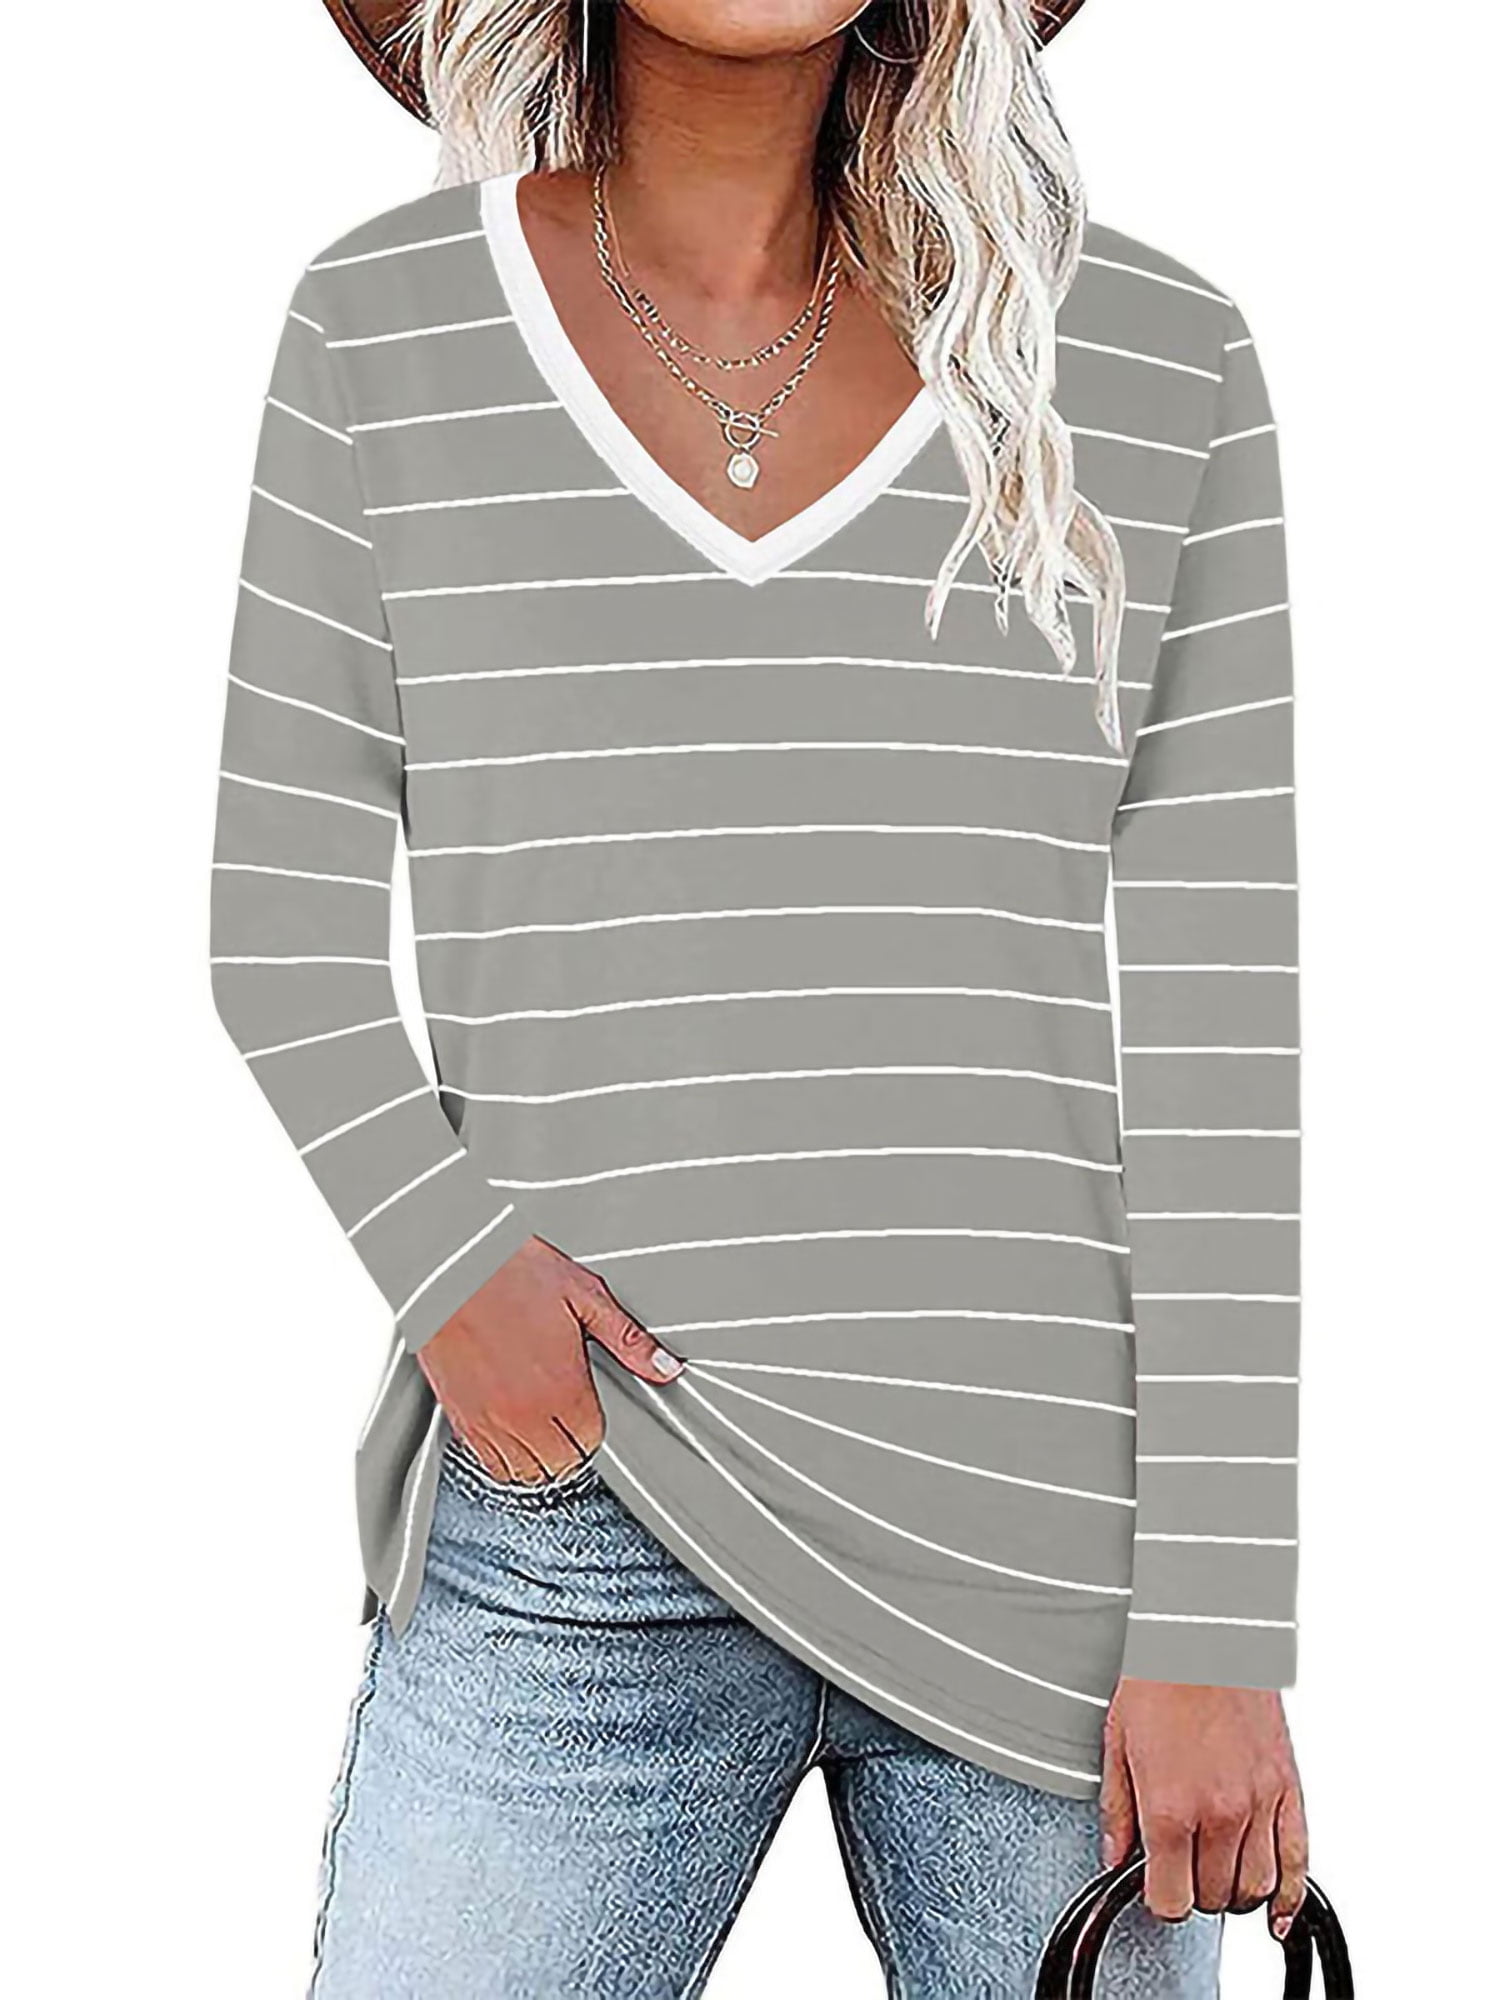 Women Striped Long Sleeve T Shirt Ladies Casual Pullover Tunic Tops Loose Blouse